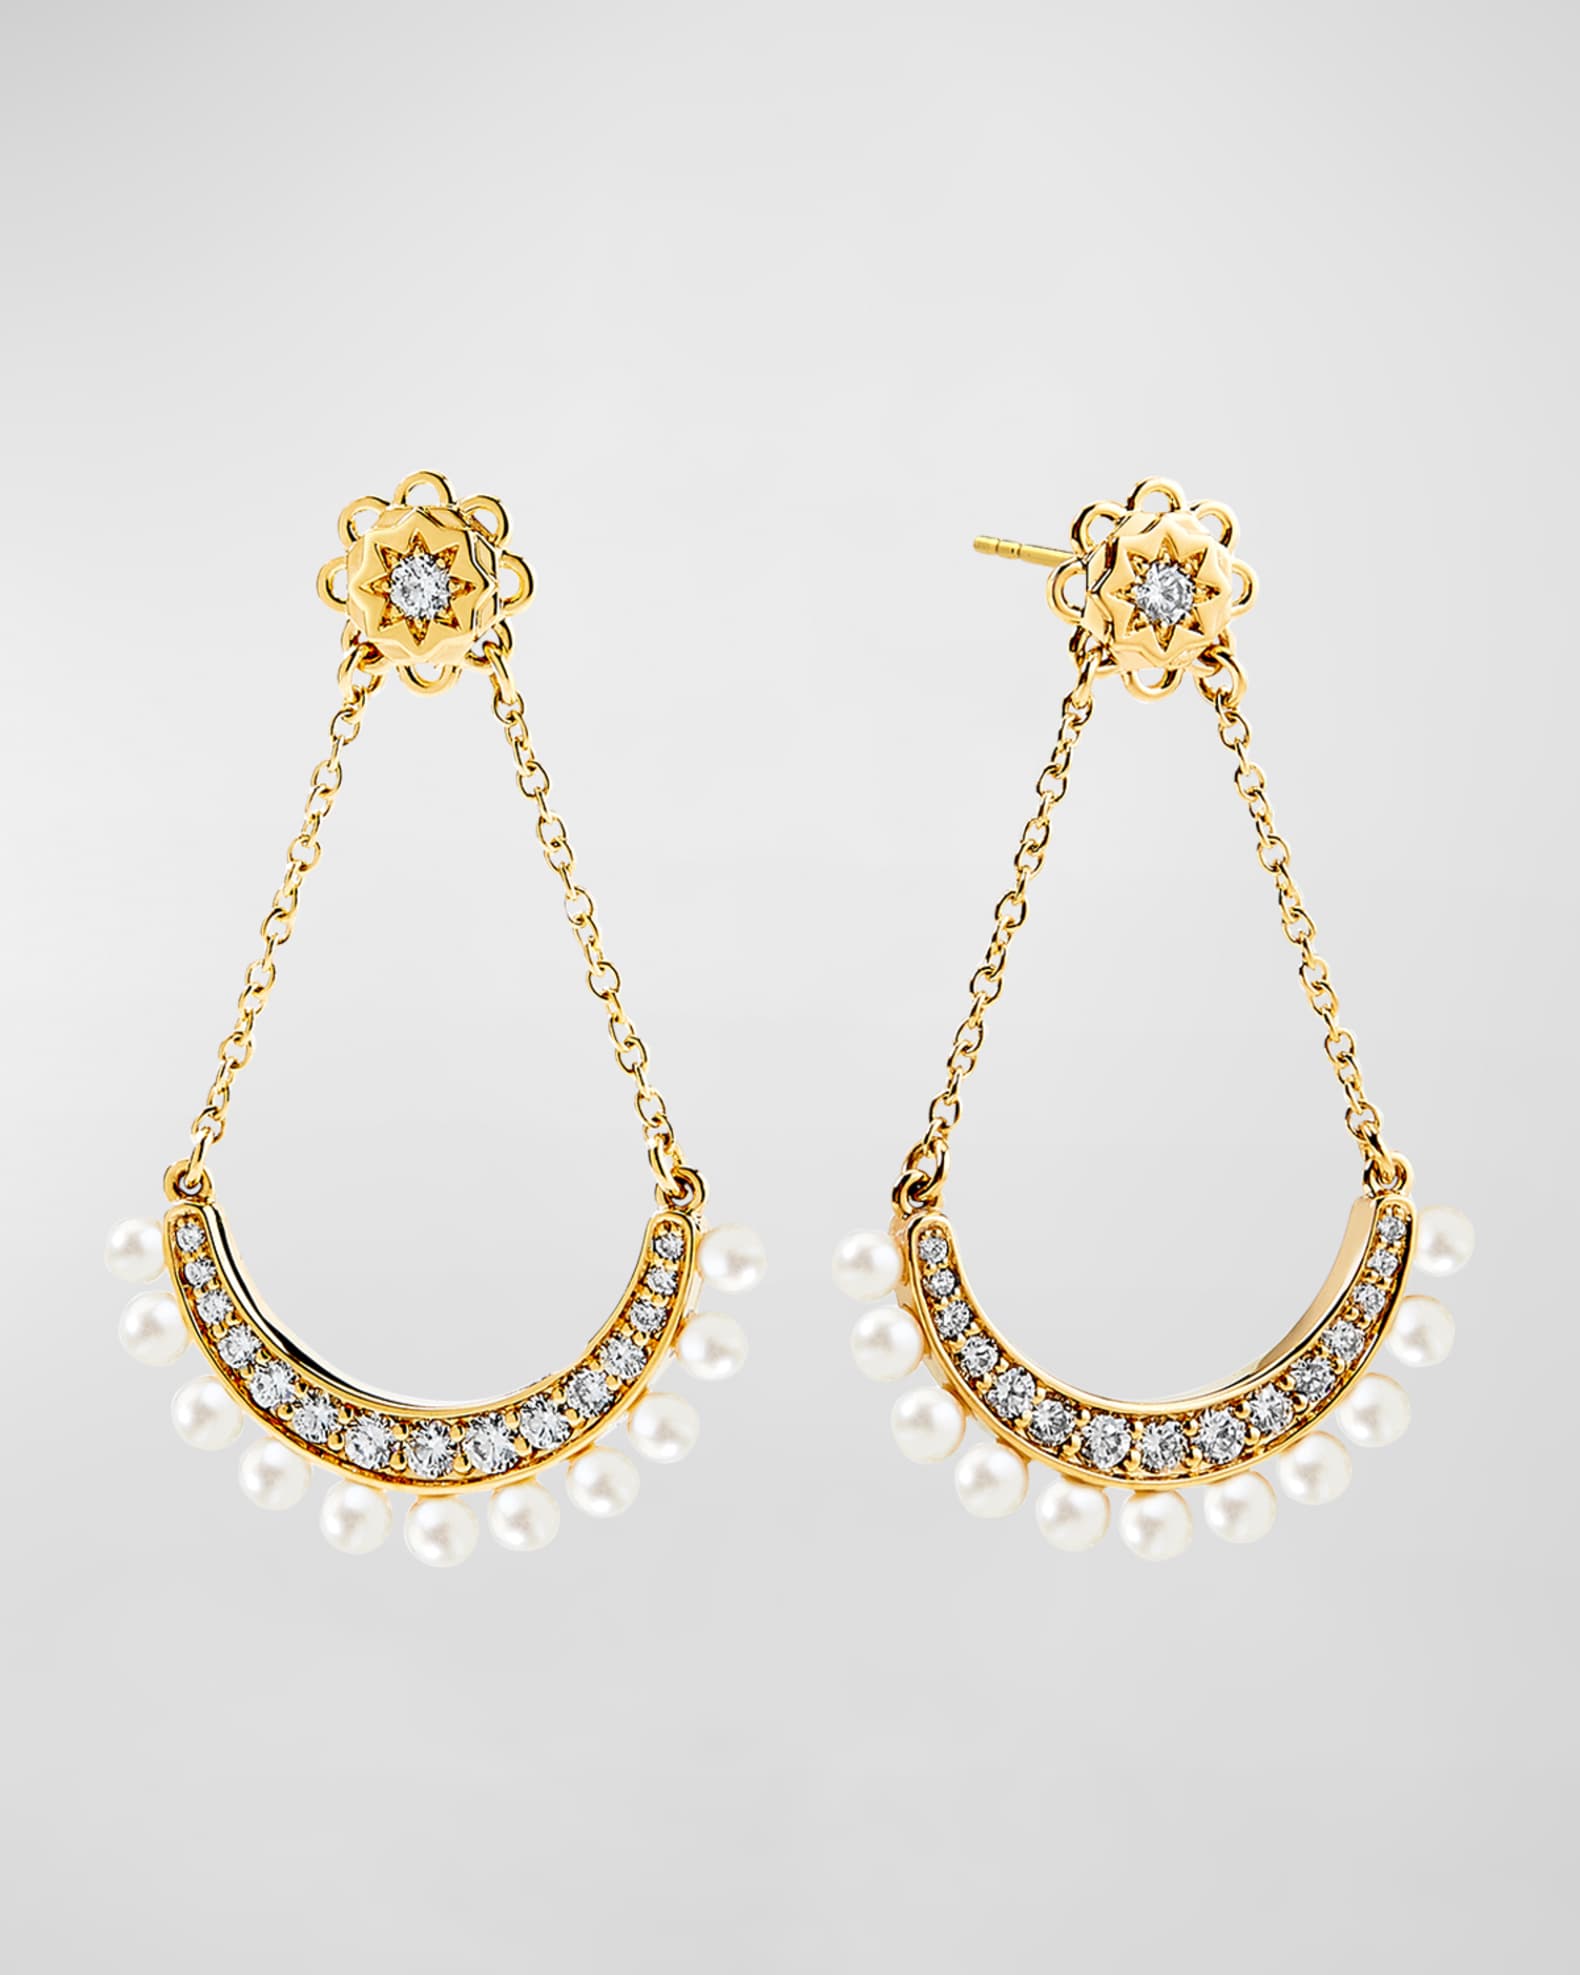 Chanel Classic Flap Bag Earrings Champagne Metal and Glass Pearls